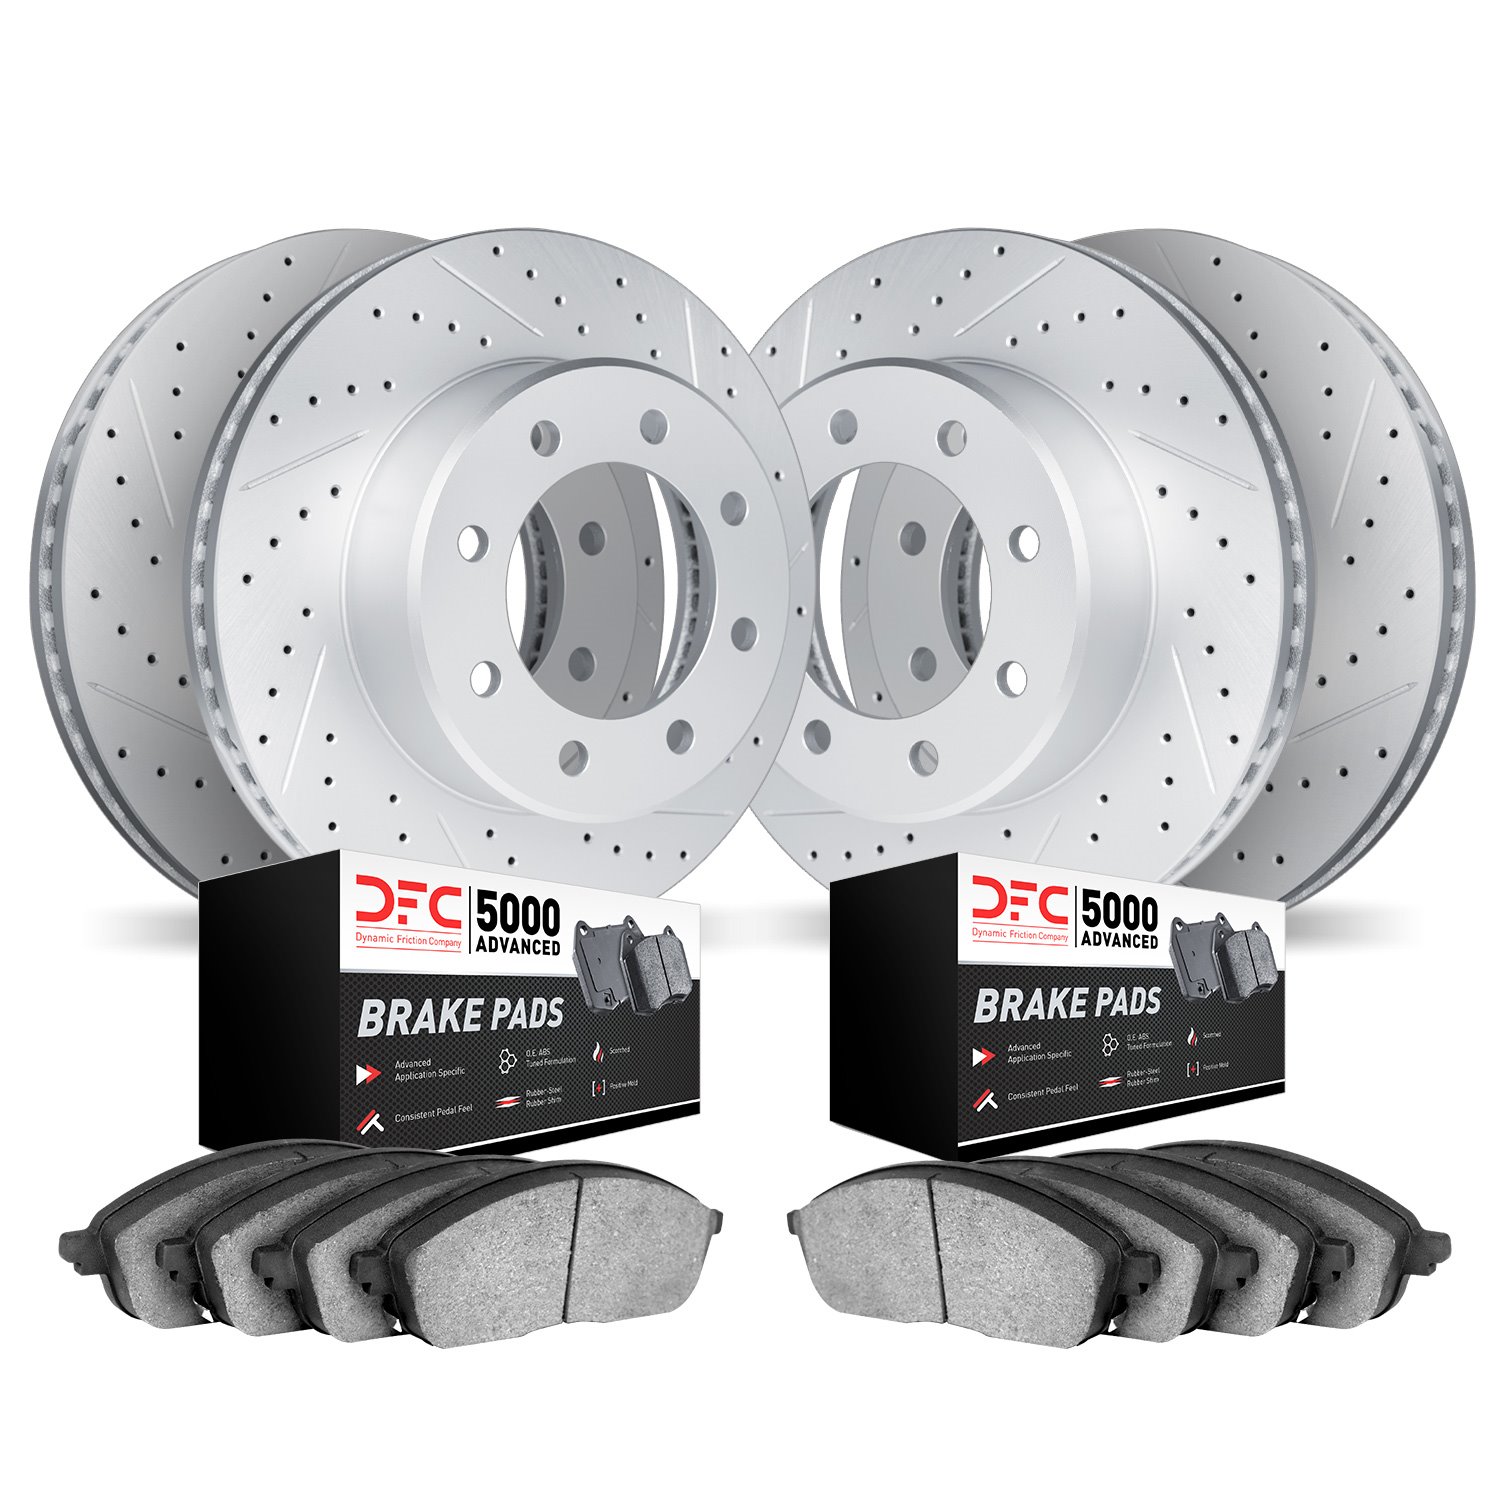 2504-48024 Geoperformance Drilled/Slotted Rotors w/5000 Advanced Brake Pads Kit, 2018-2020 GM, Position: Front and Rear